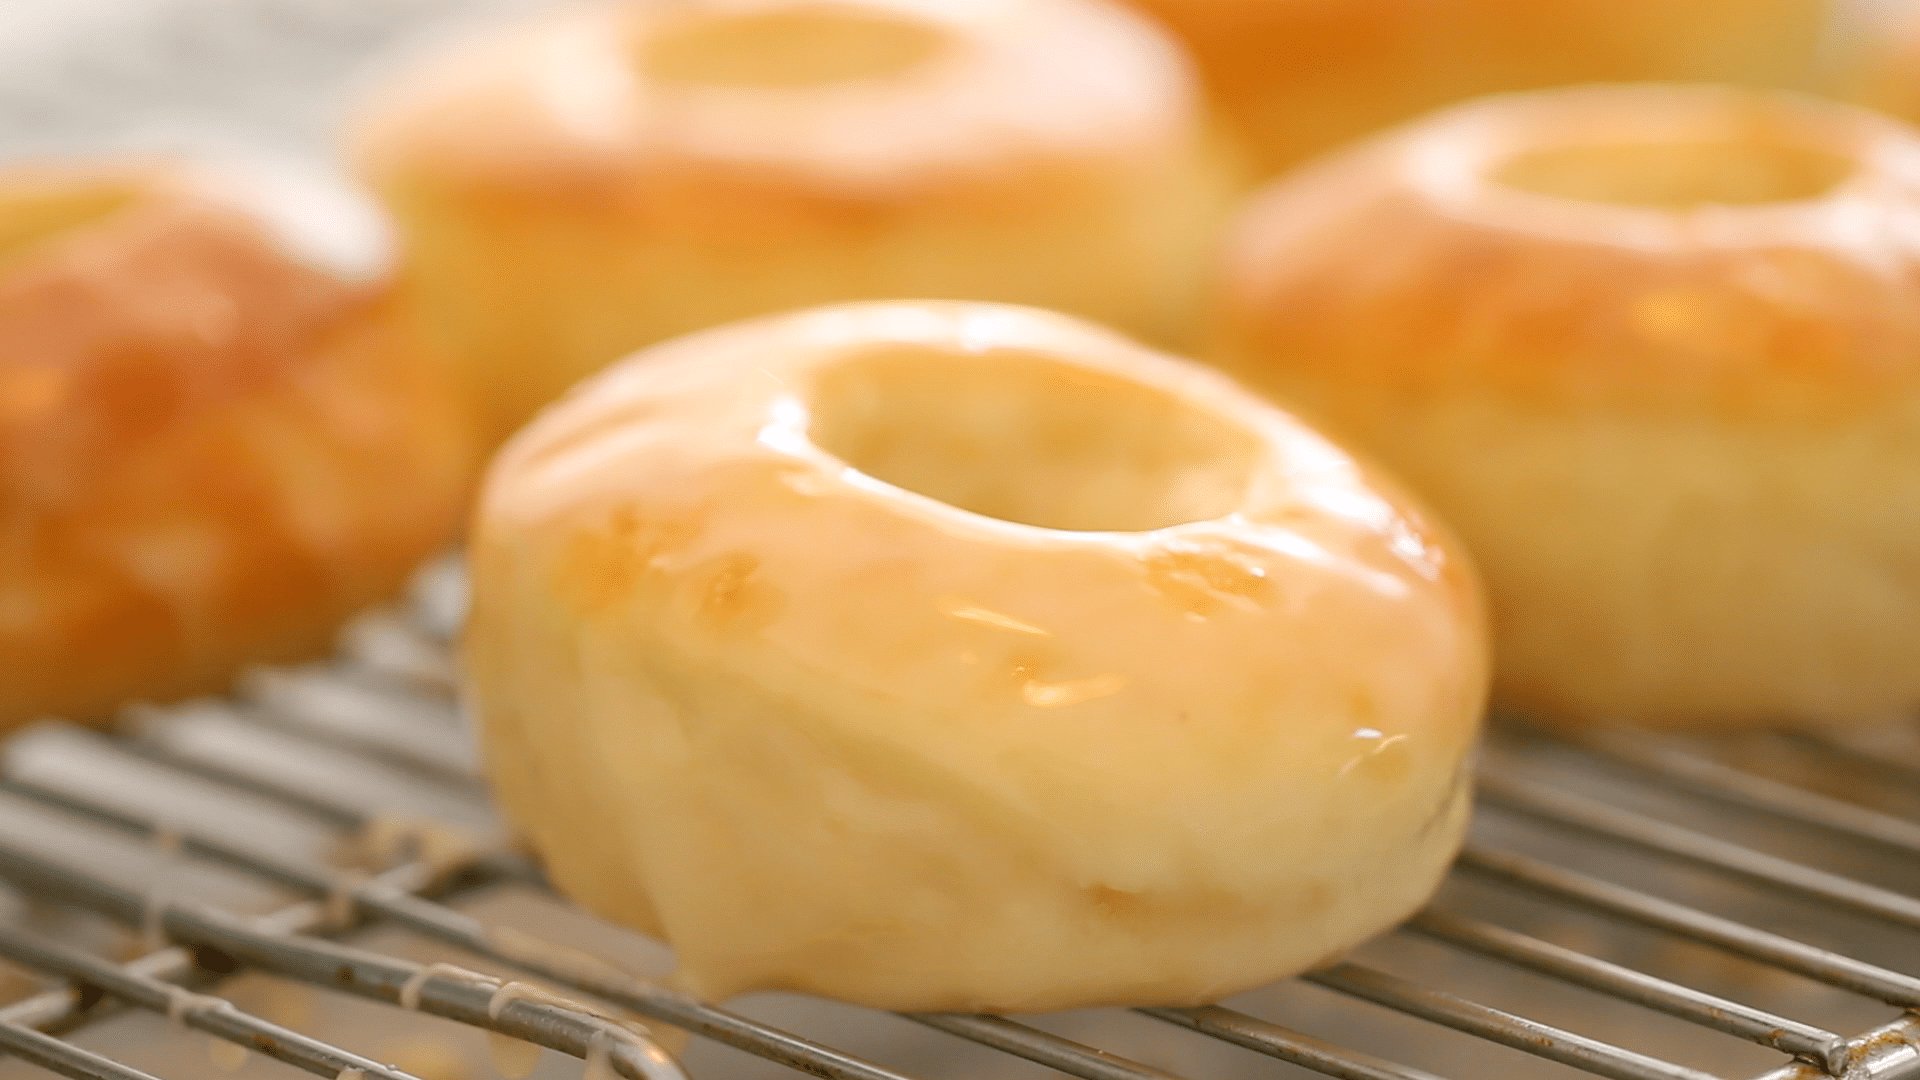 Baked glazed donuts on a cooling rack.